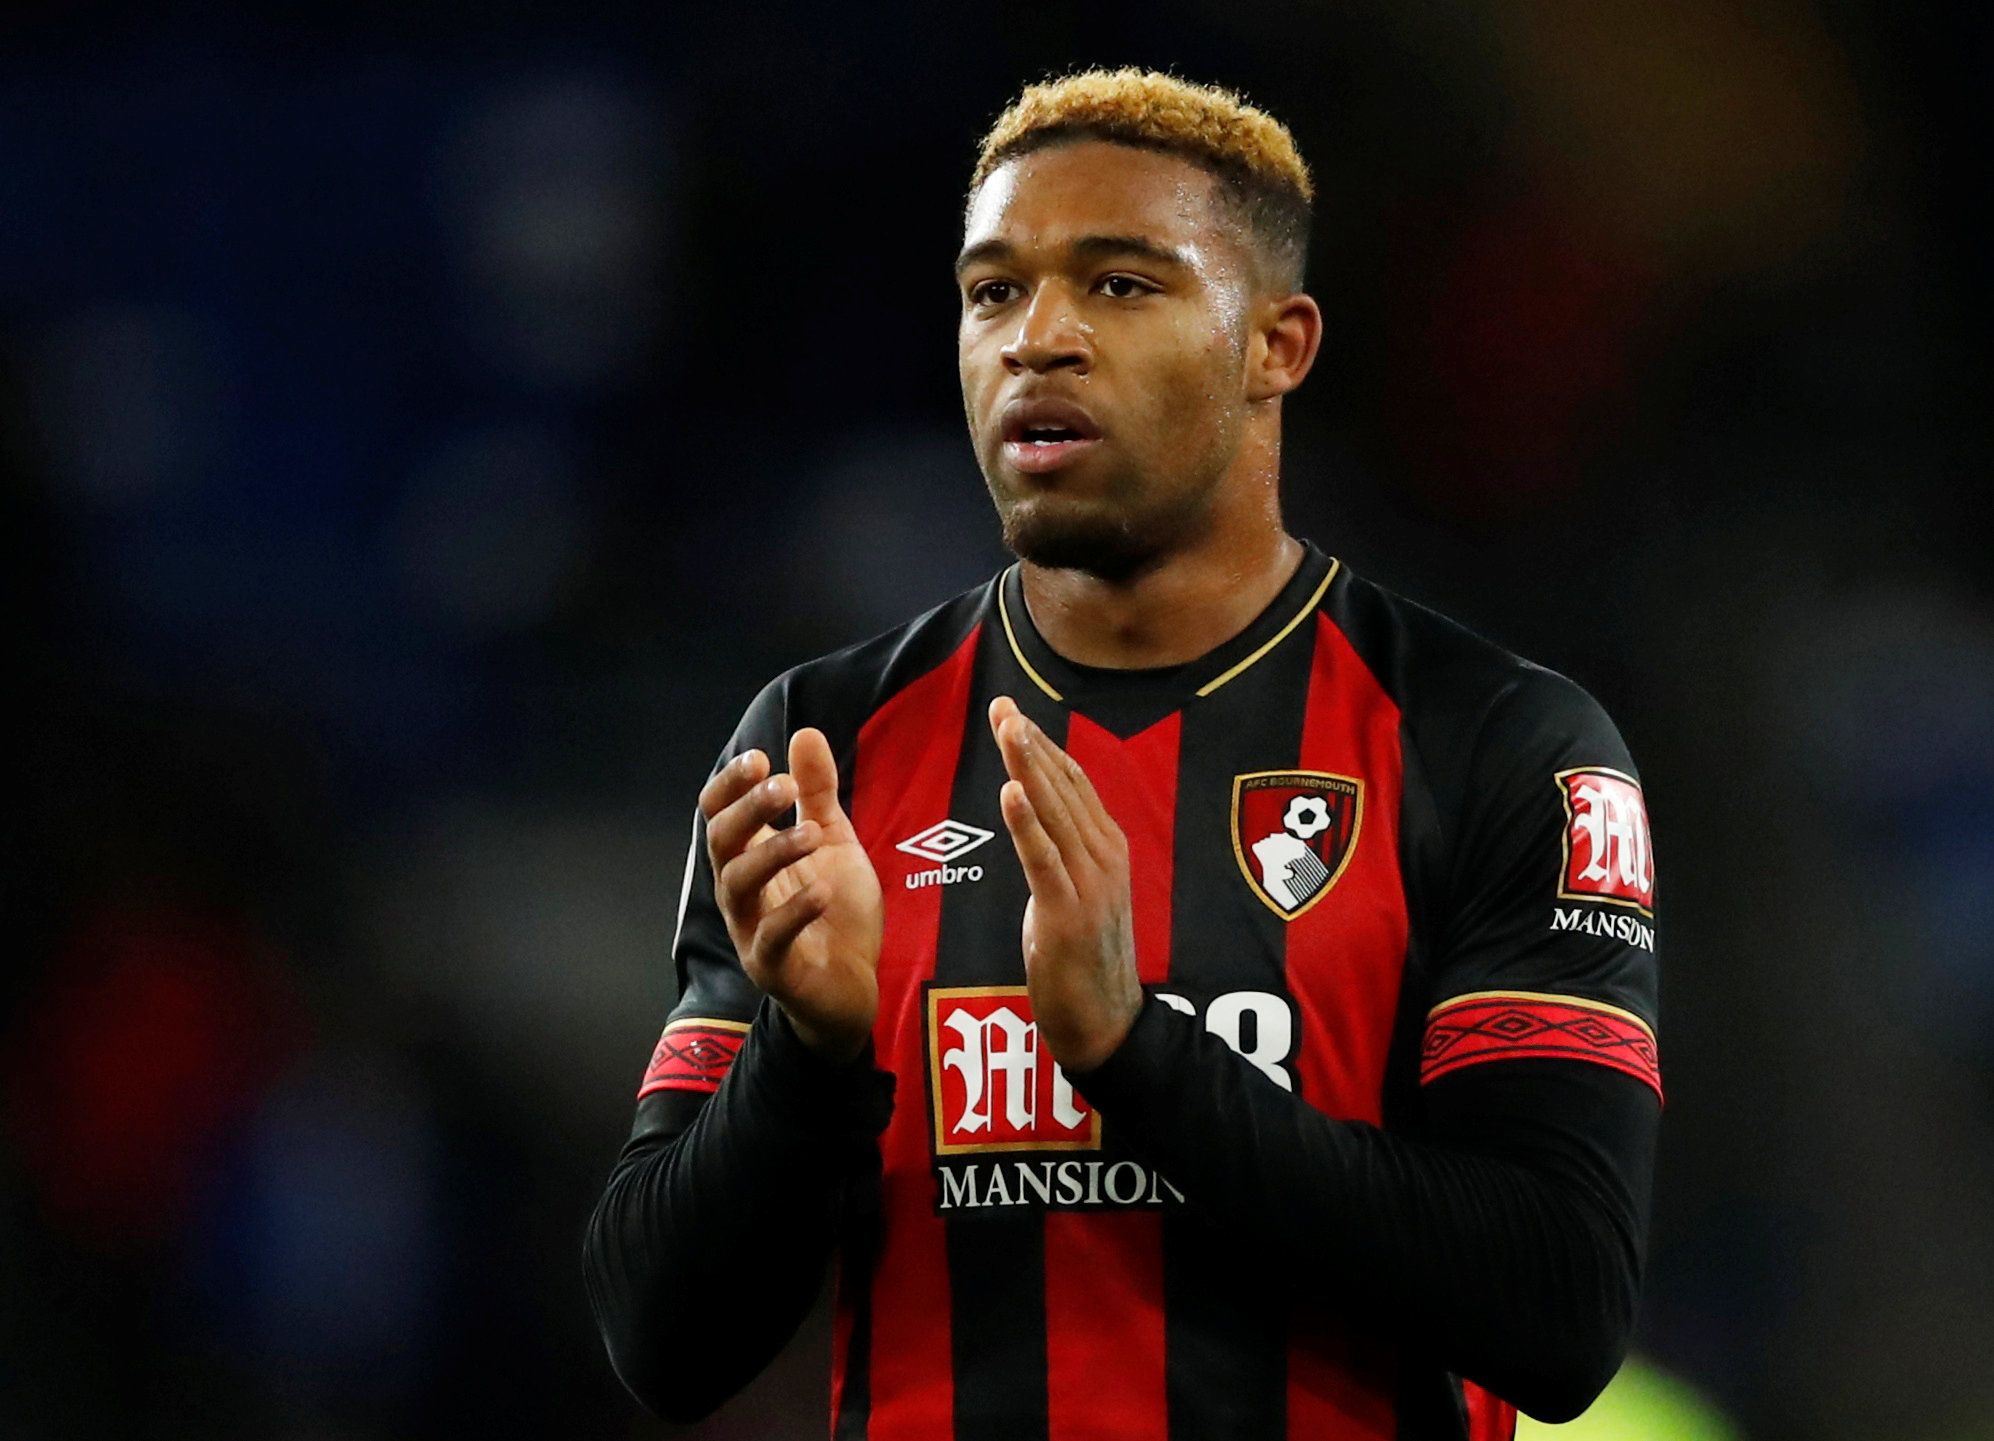 Soccer Football - Premier League - Cardiff City v AFC Bournemouth - Cardiff City Stadium, Cardiff, Britain - February 2, 2019  Bournemouth's Jordon Ibe applauds the fans at the end of the match   Action Images via Reuters/Andrew Boyers  EDITORIAL USE ONLY. No use with unauthorized audio, video, data, fixture lists, club/league logos or 